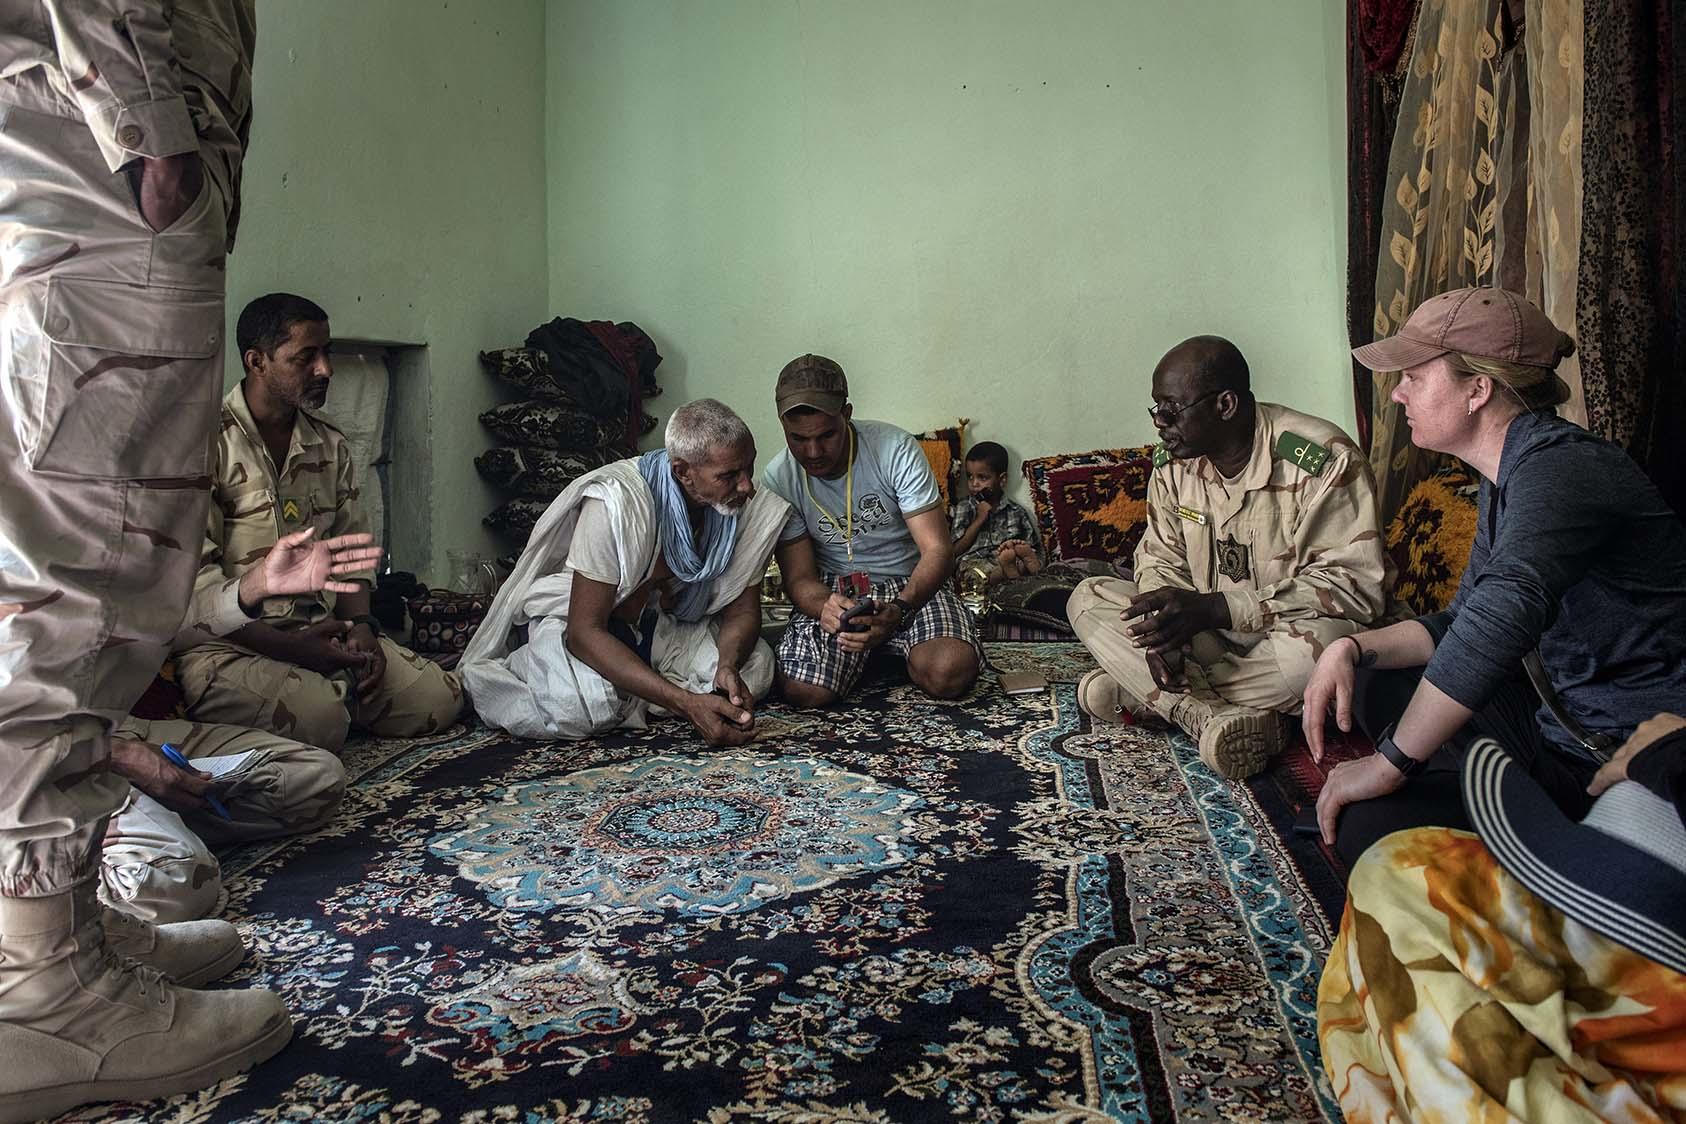 Mauritanian military personnel and U.S. Army officers conduct community leader engagements in a village near Atar, Feb. 20, 2020. (Laetitia Vancon/The New York Times)